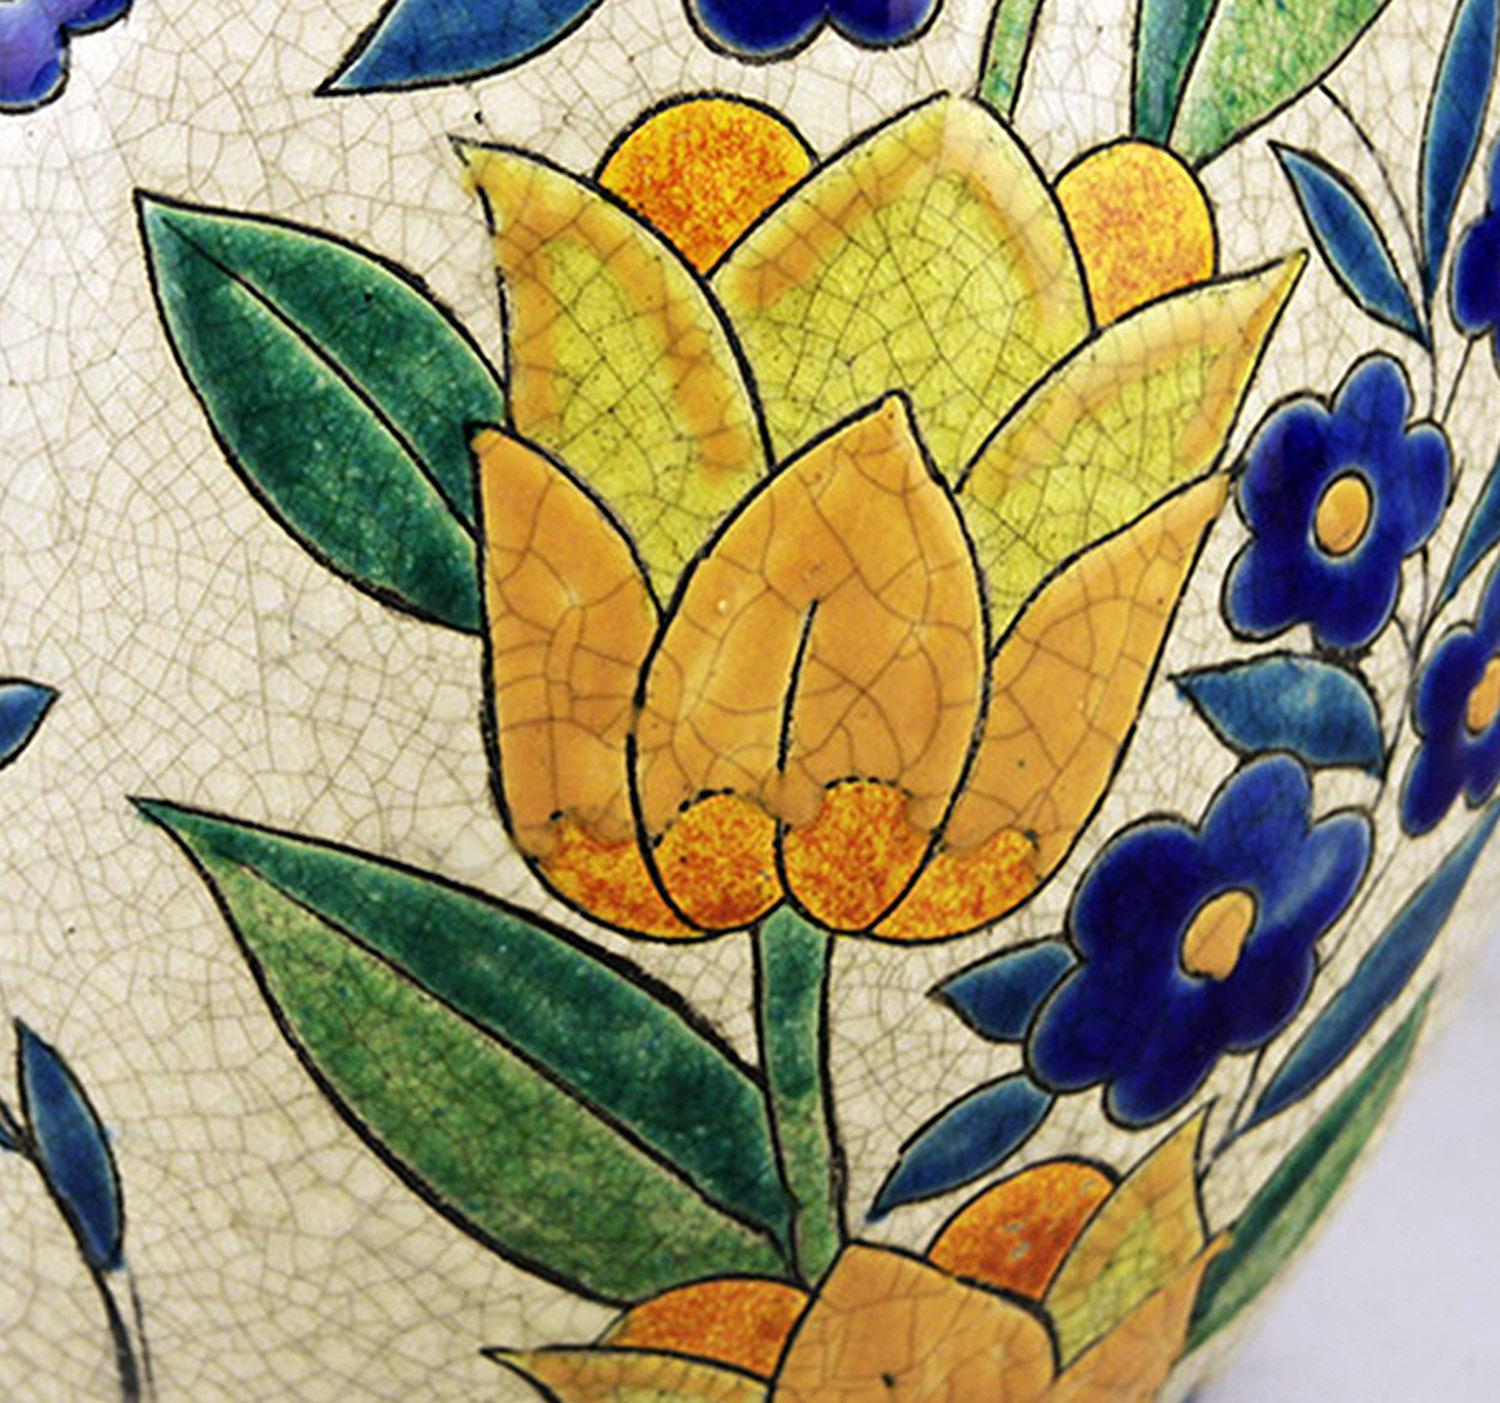 Art Déco Belgian Glazed Pottery/Ceramic Charles Catteau-Like Vase by Boch Freres In Good Condition For Sale In North Miami, FL